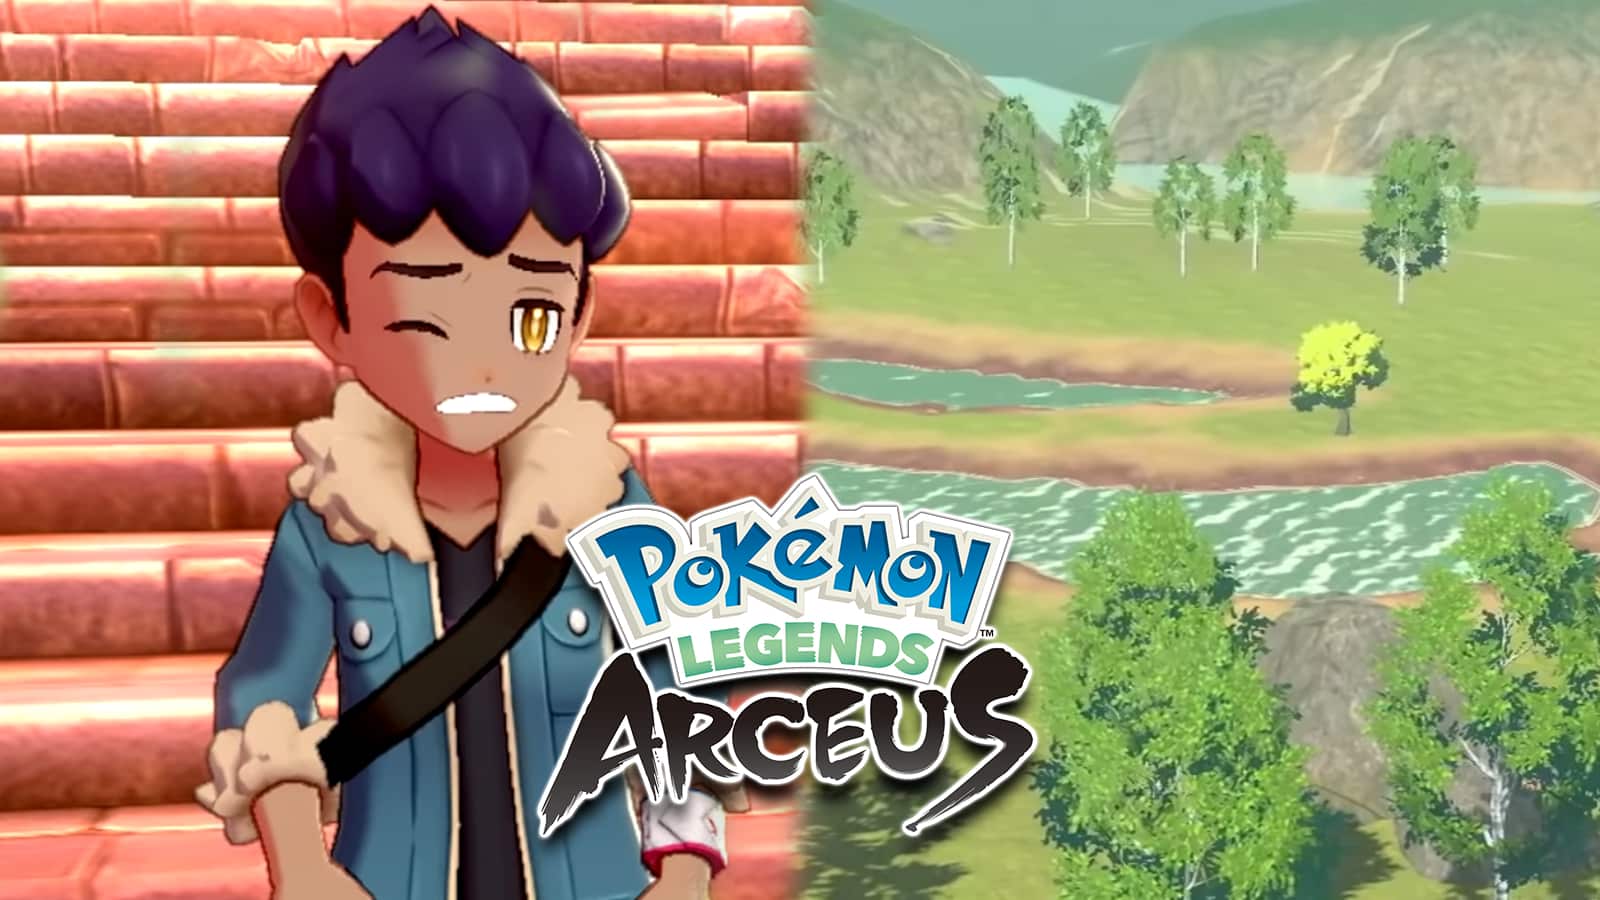 Why Pokemon Legends Arceus trailers are actually worrying - Dexerto